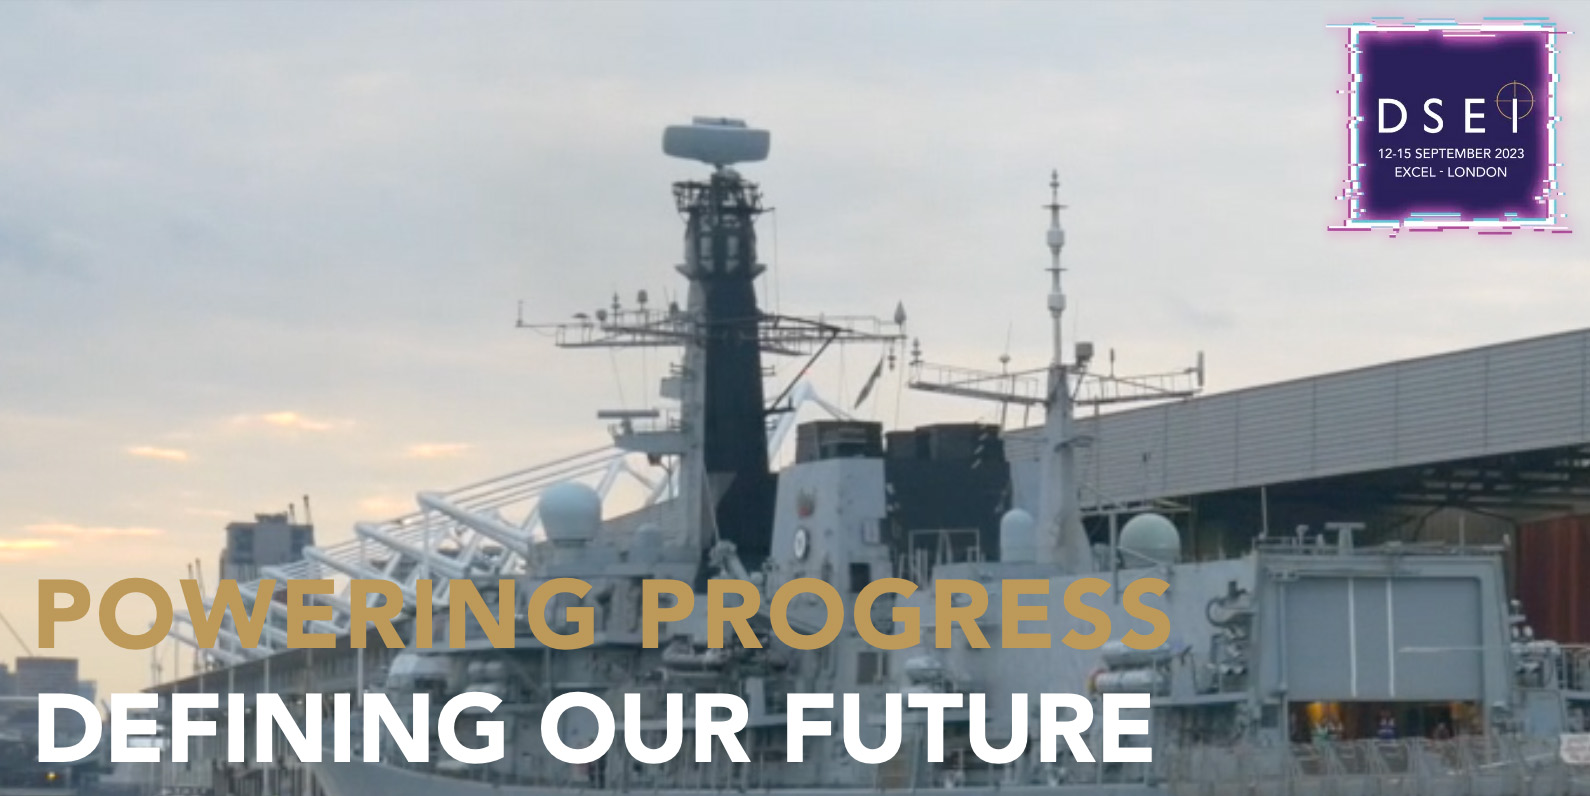 DSEI 2023 - Are you attending?